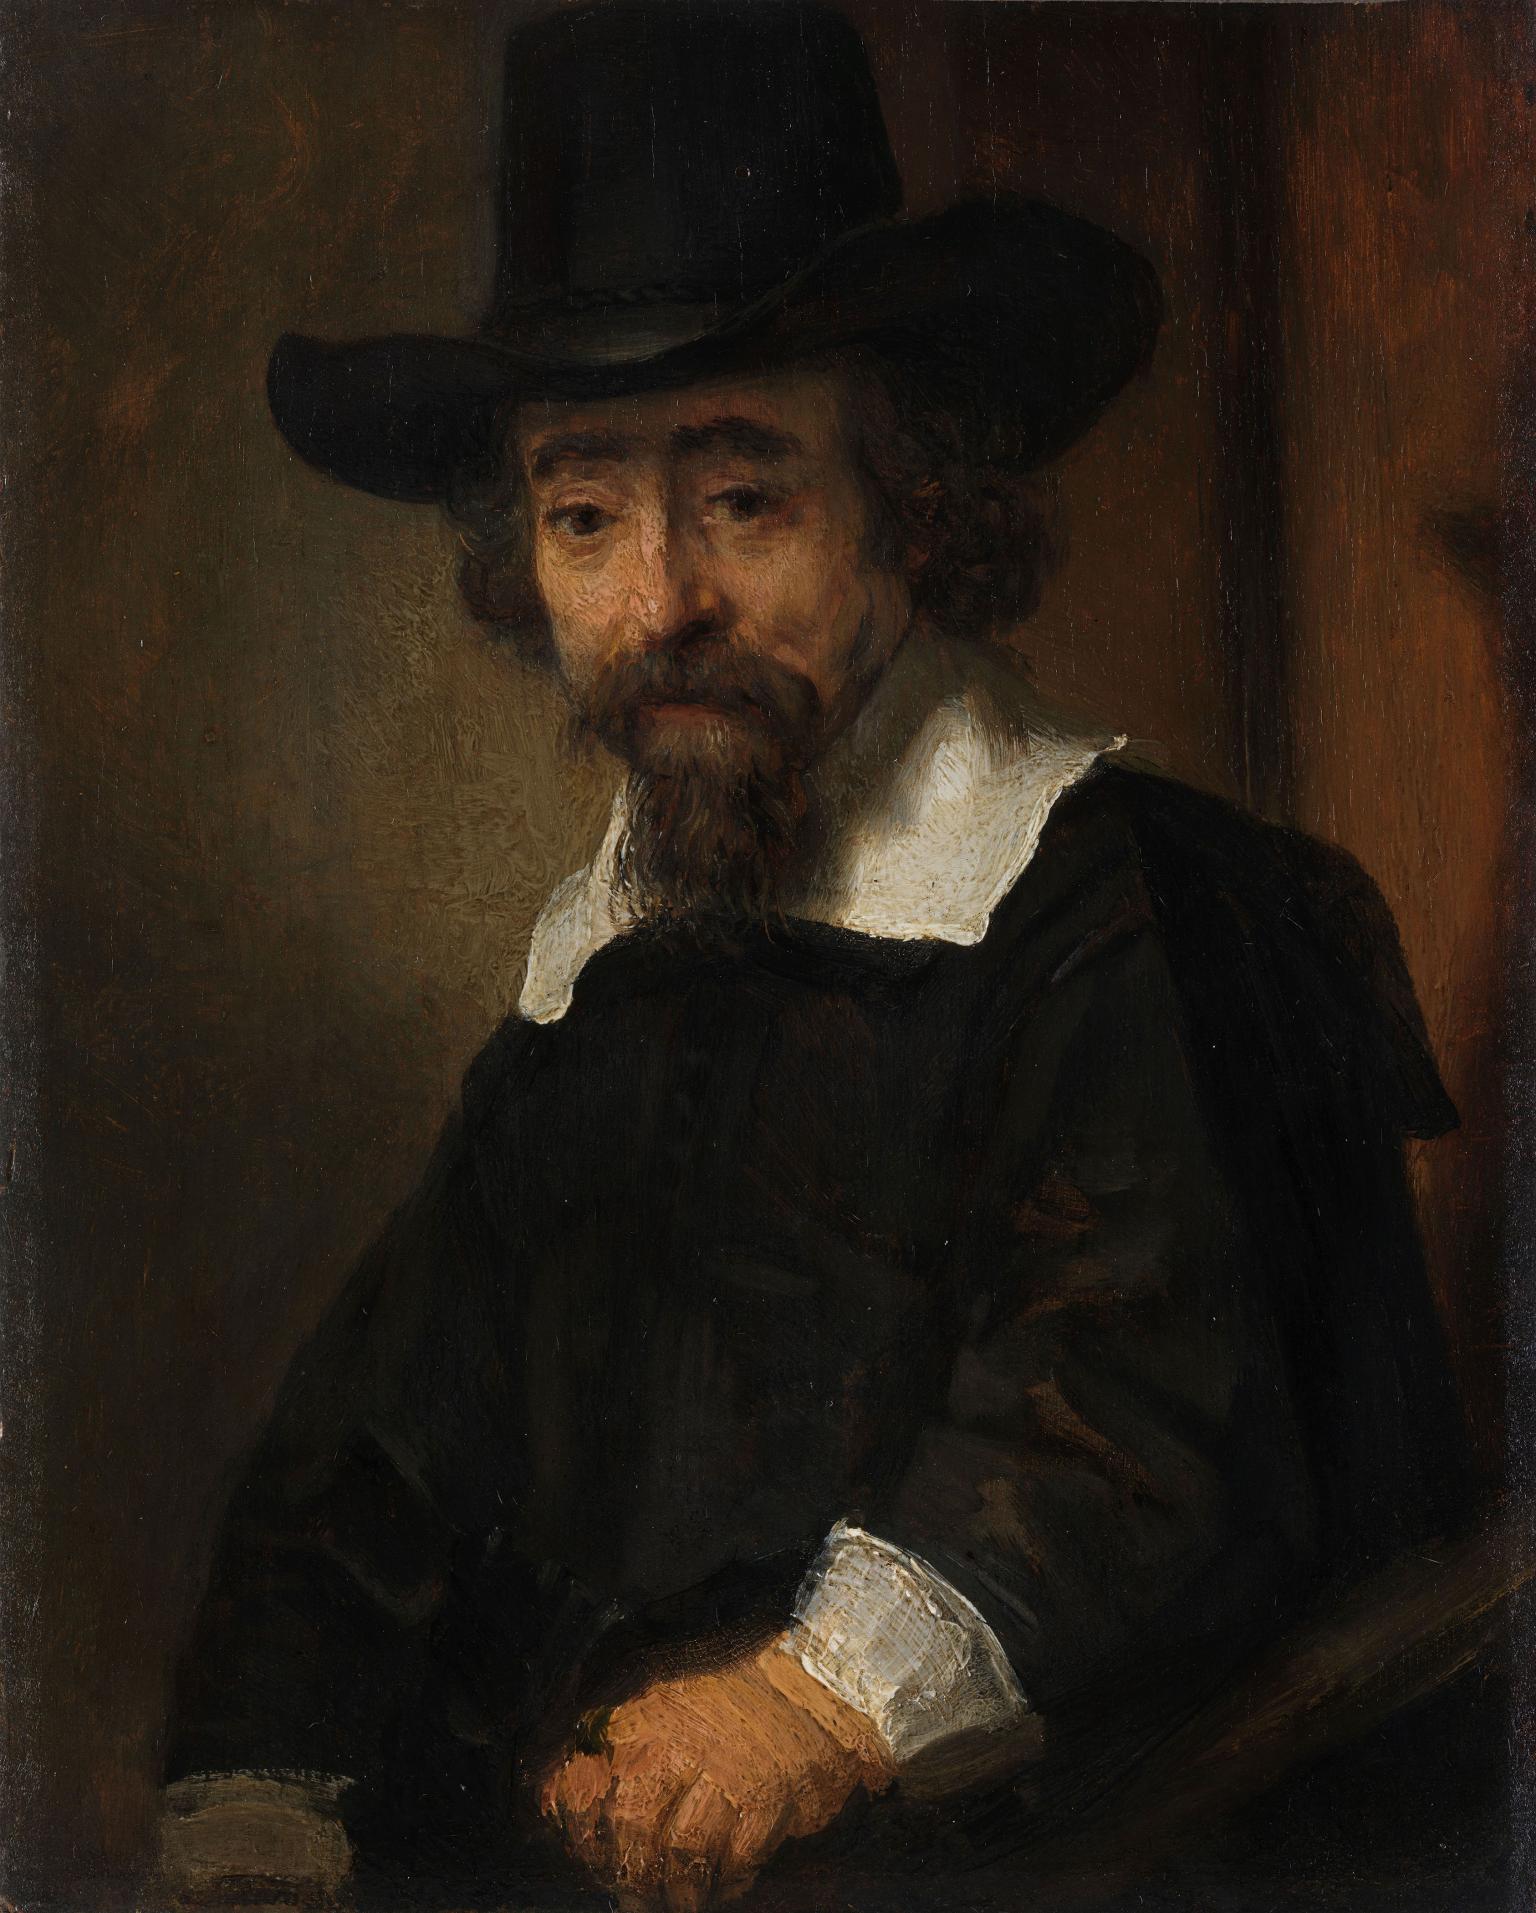 Portrait painting depicting bearded man in hat and collar facing viewer.